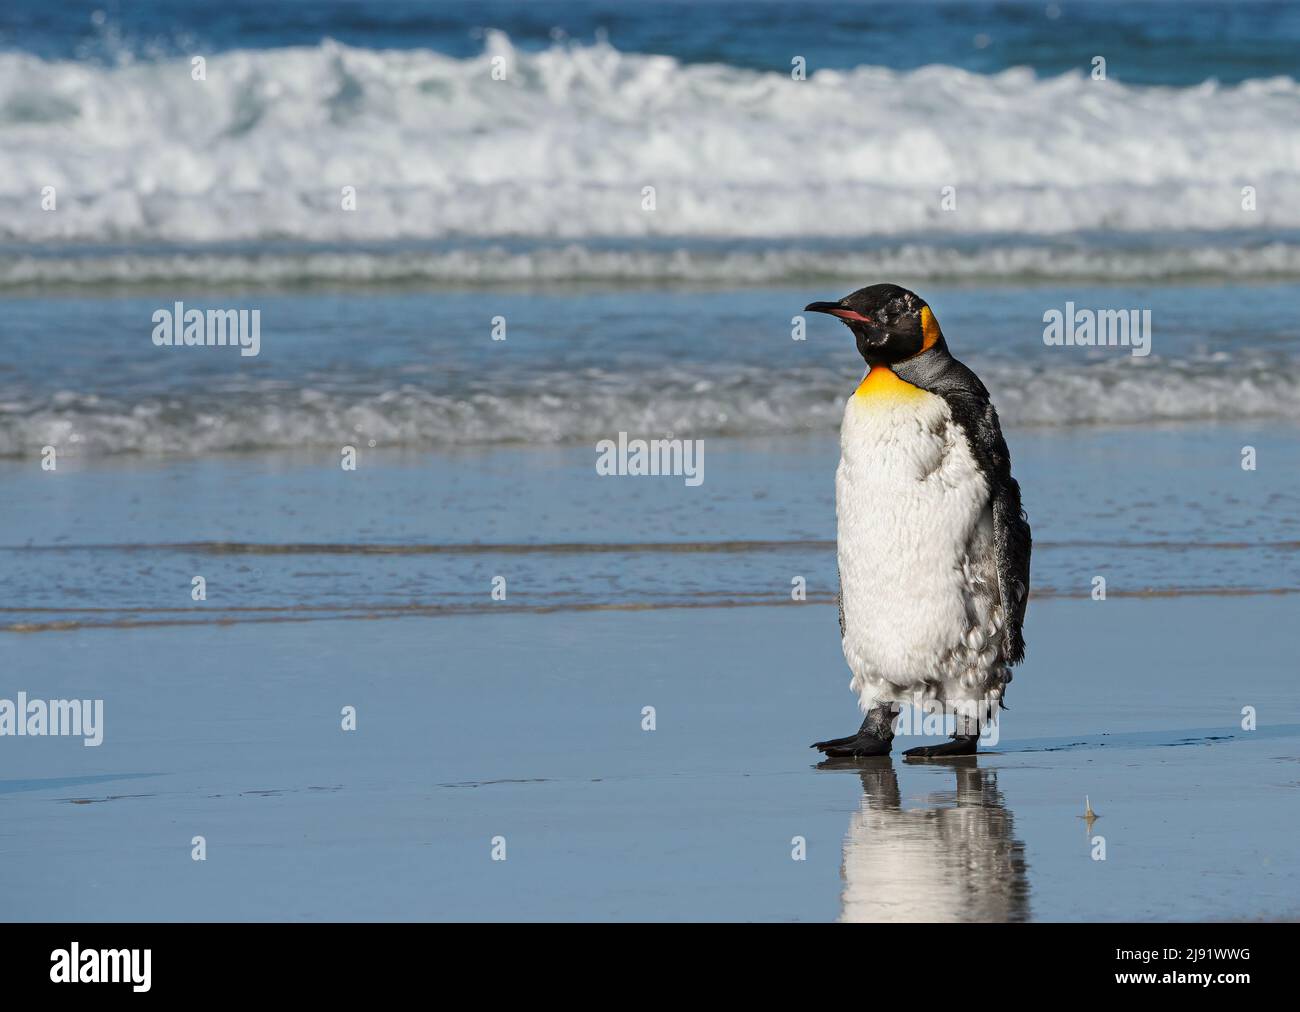 Molting King Penguin on the shore with waves in the background Stock Photo